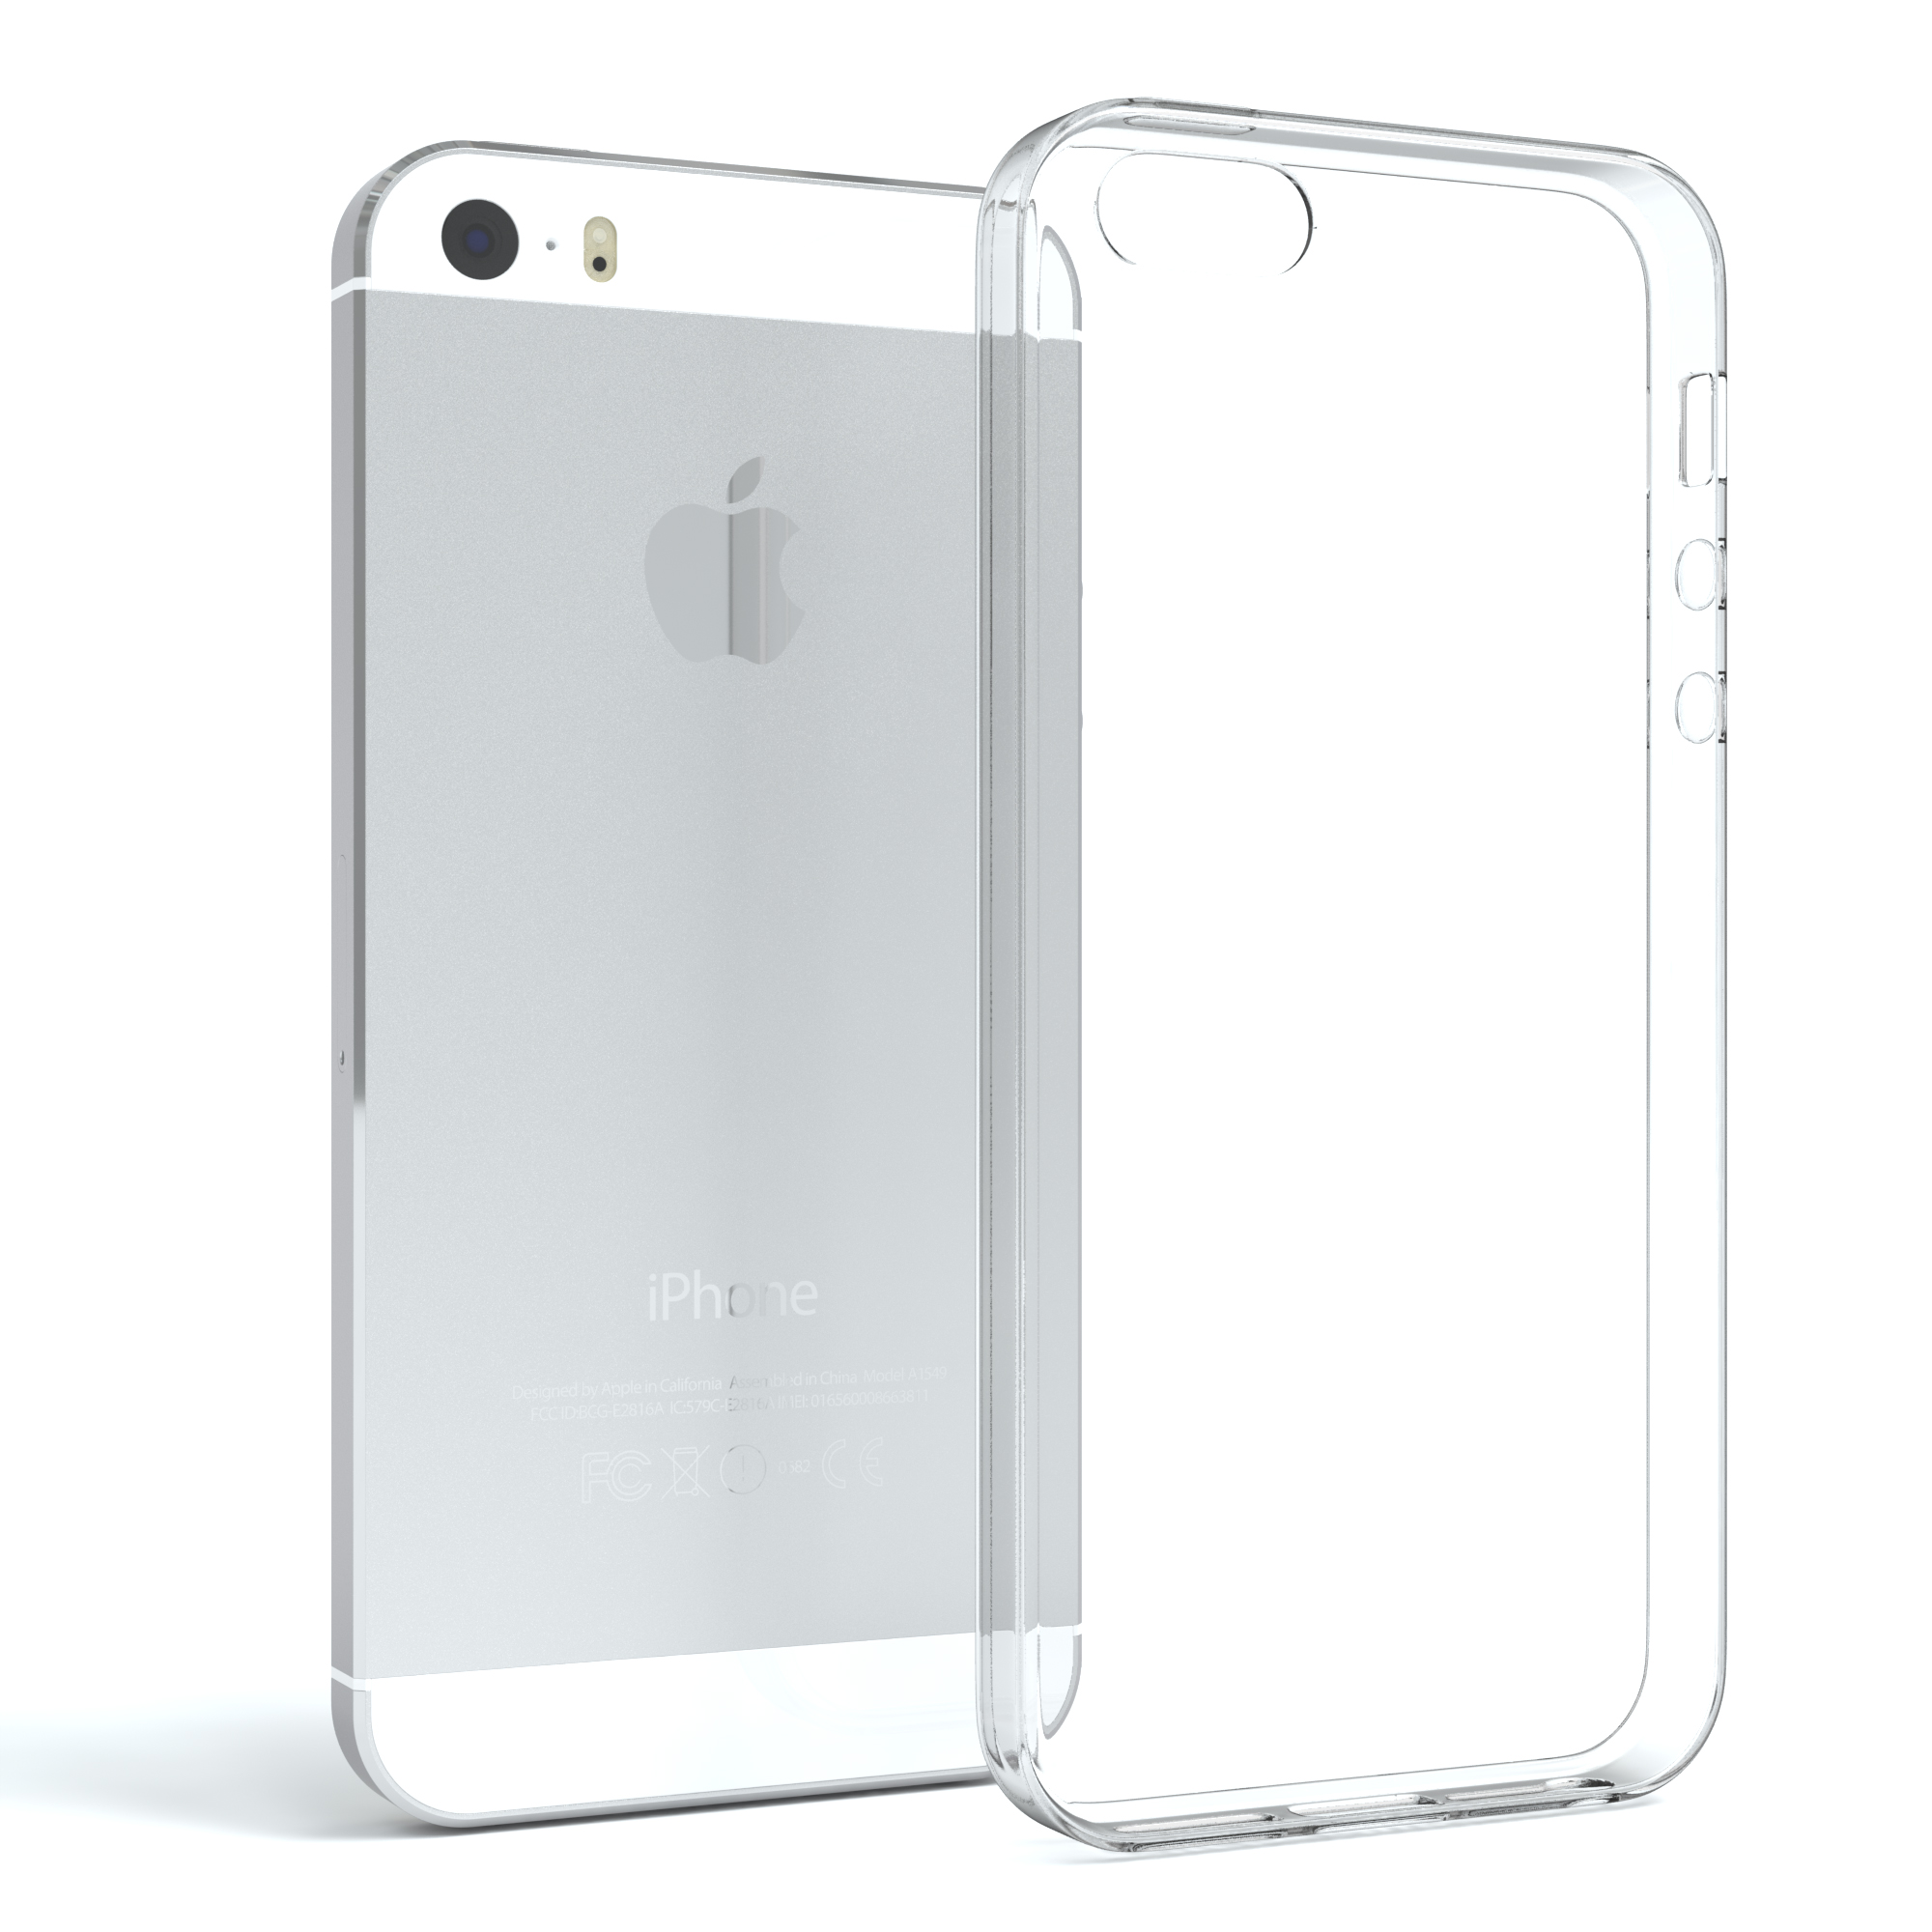 5S, Backcover, Clear, / CASE iPhone iPhone SE 2016, 5 Apple, Slimcover Durchsichtig EAZY